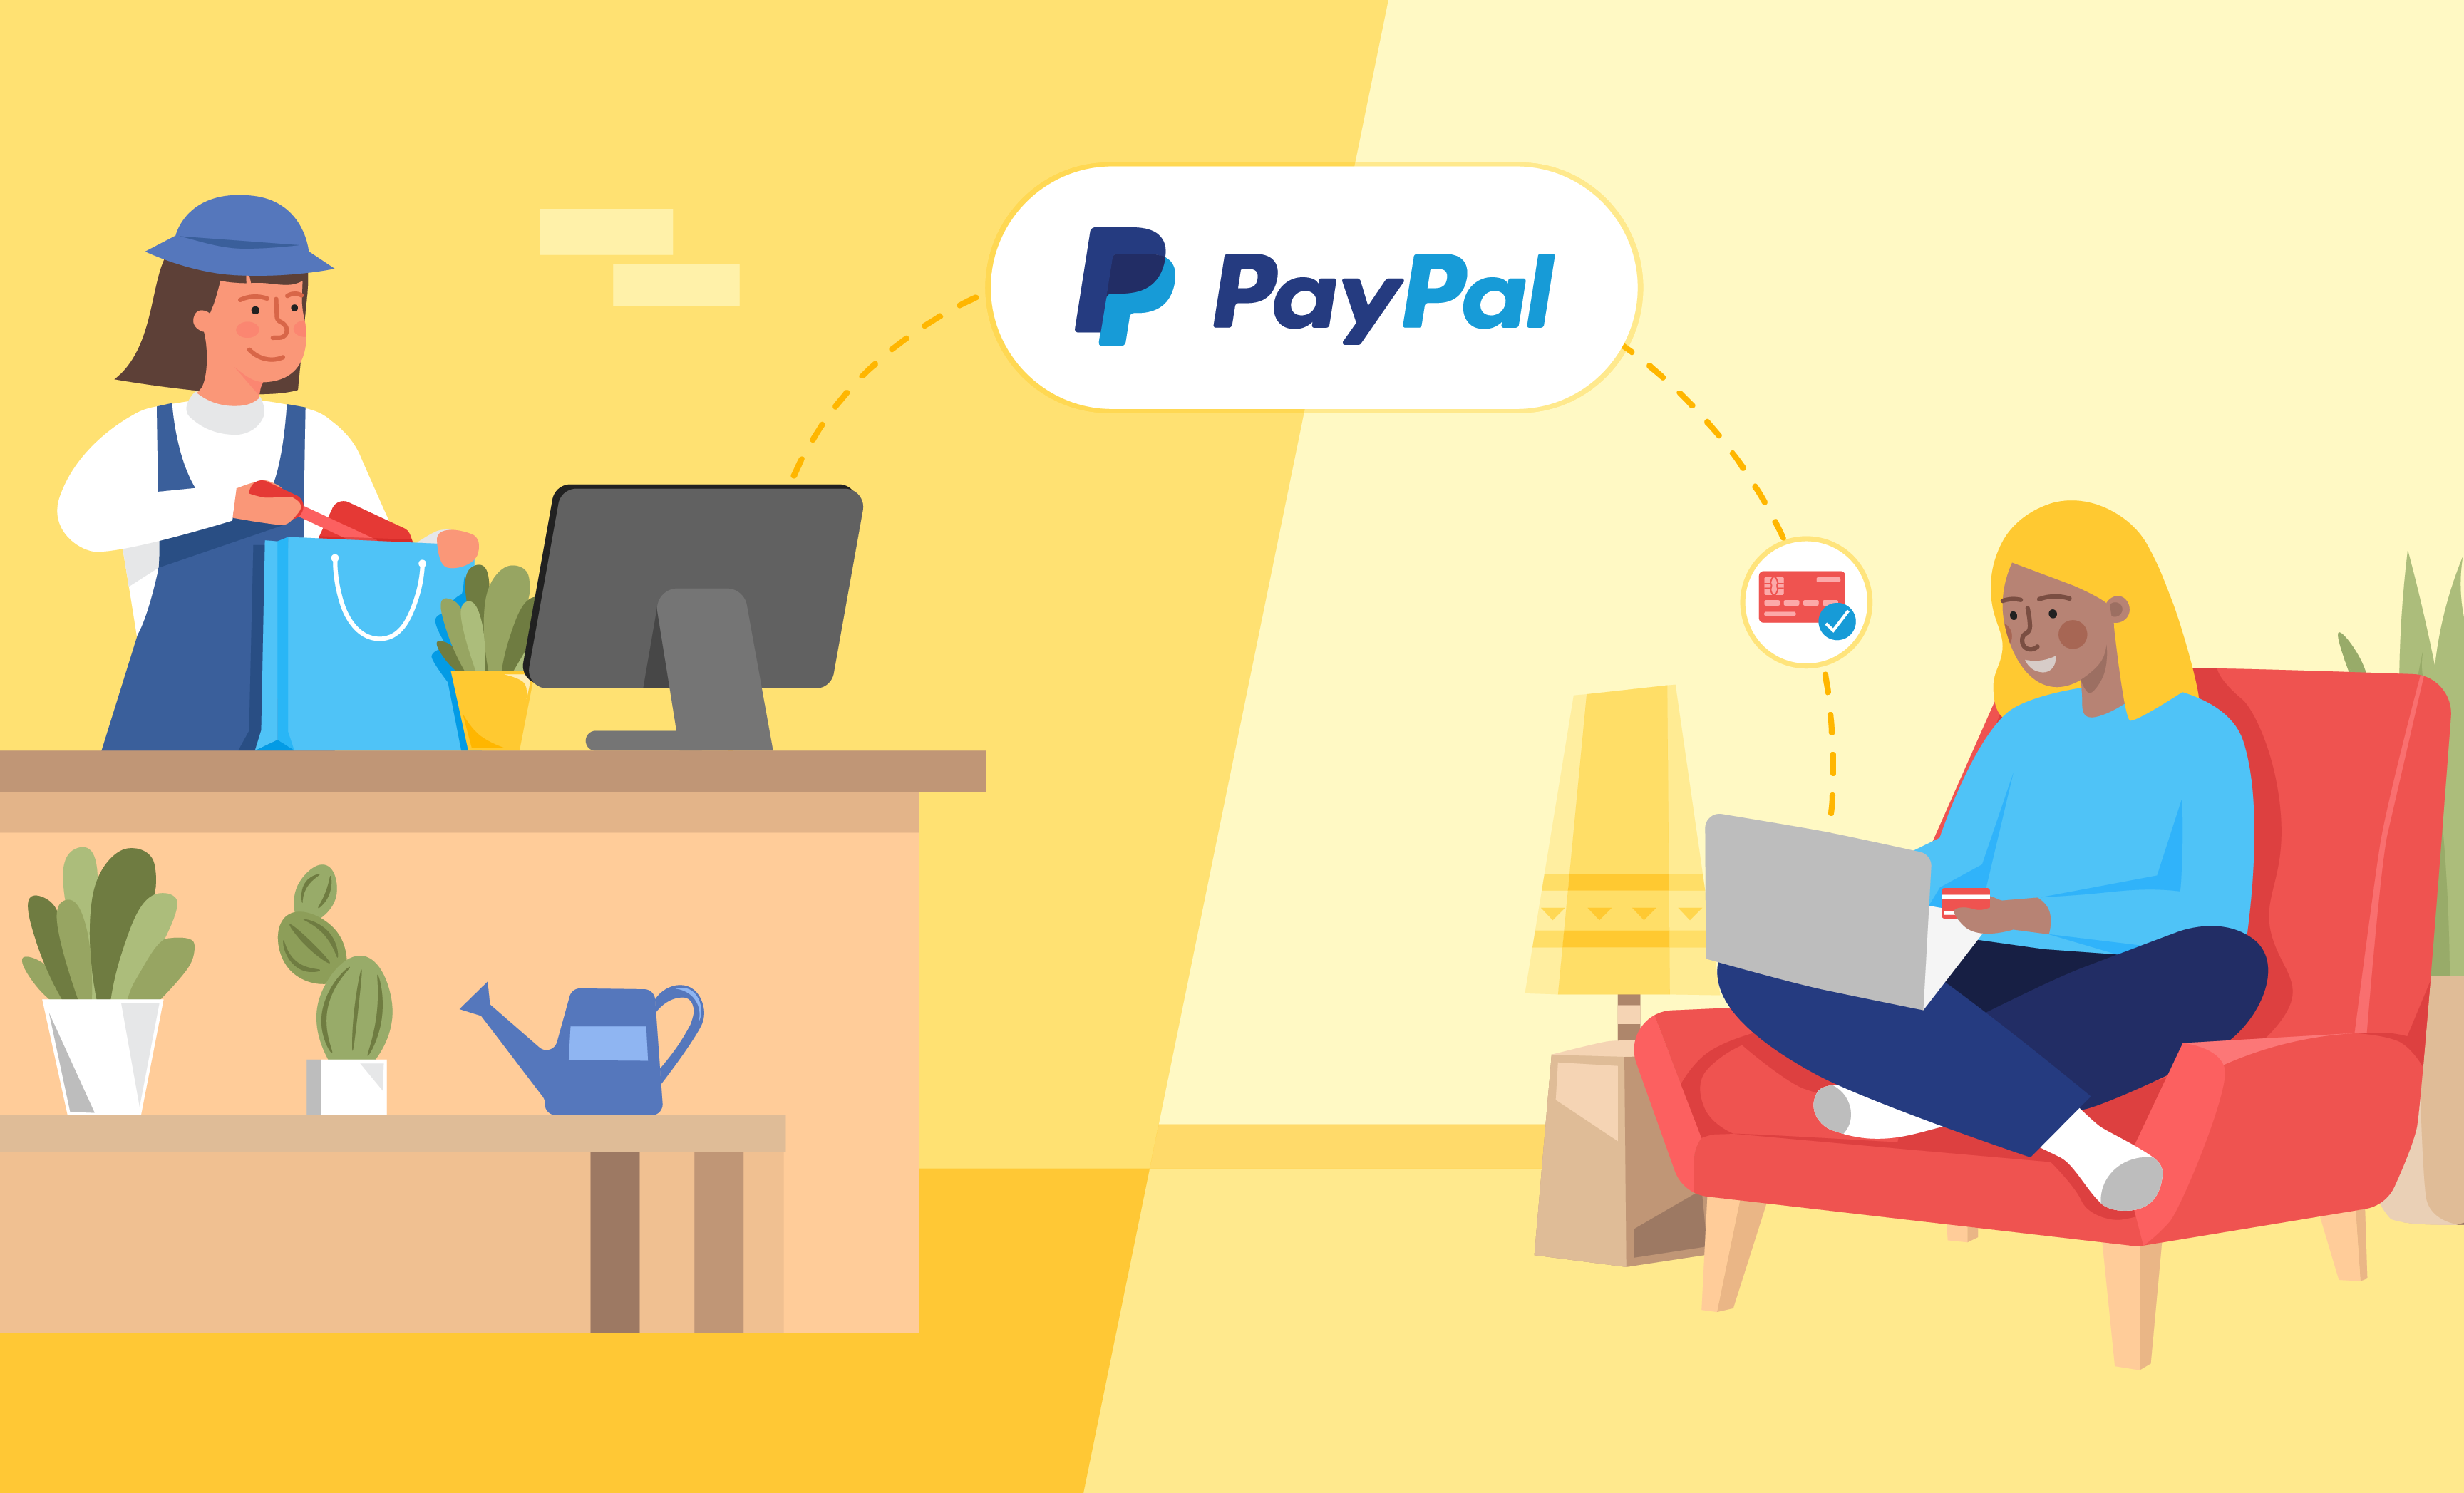 How do I talk to a human at PayPal?